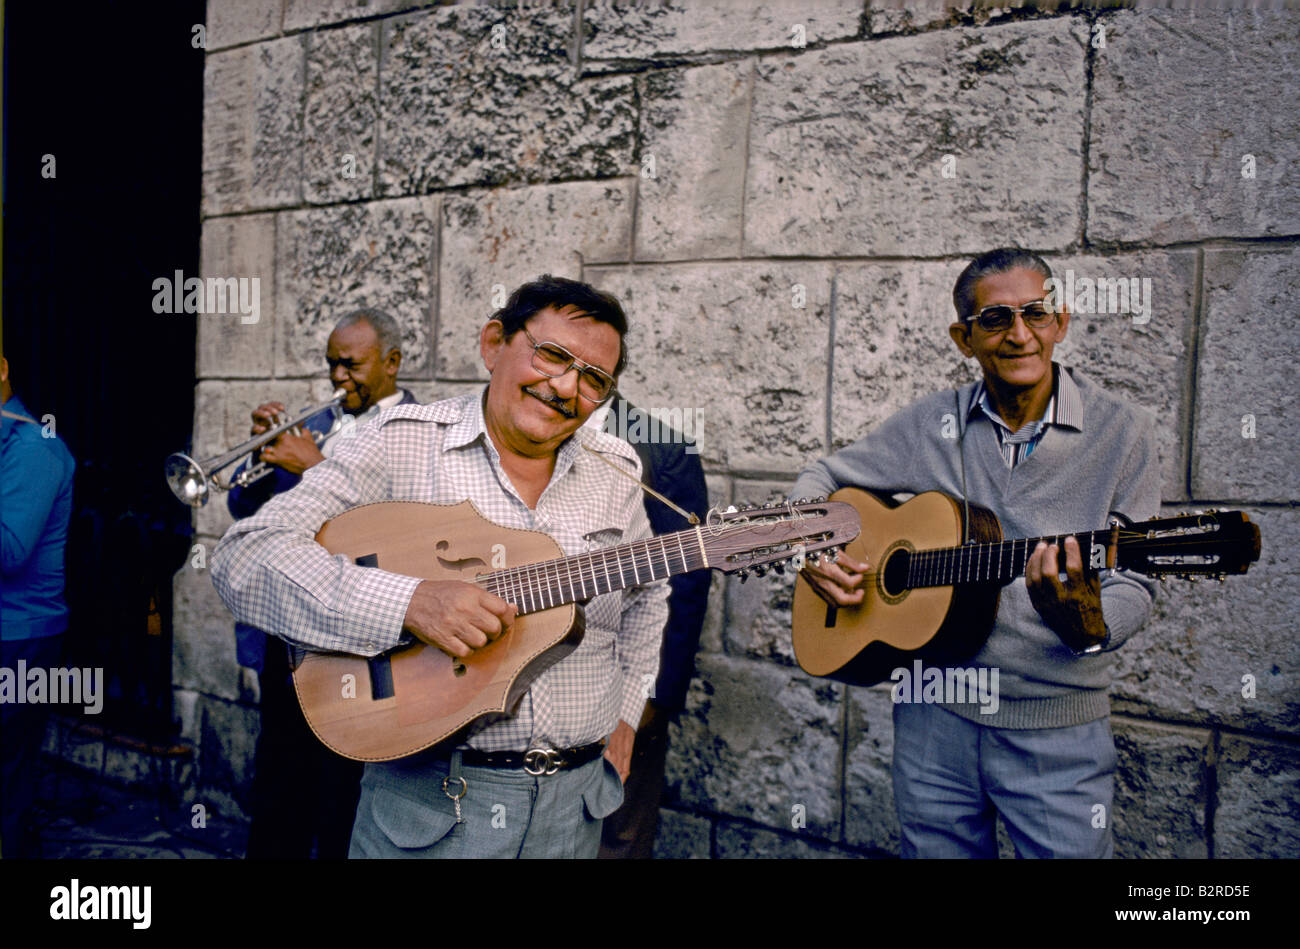 A group of male musicians on guitars and trumpet, wearing glasses and smiling, Old Town, Havana, Cuba Stock Photo